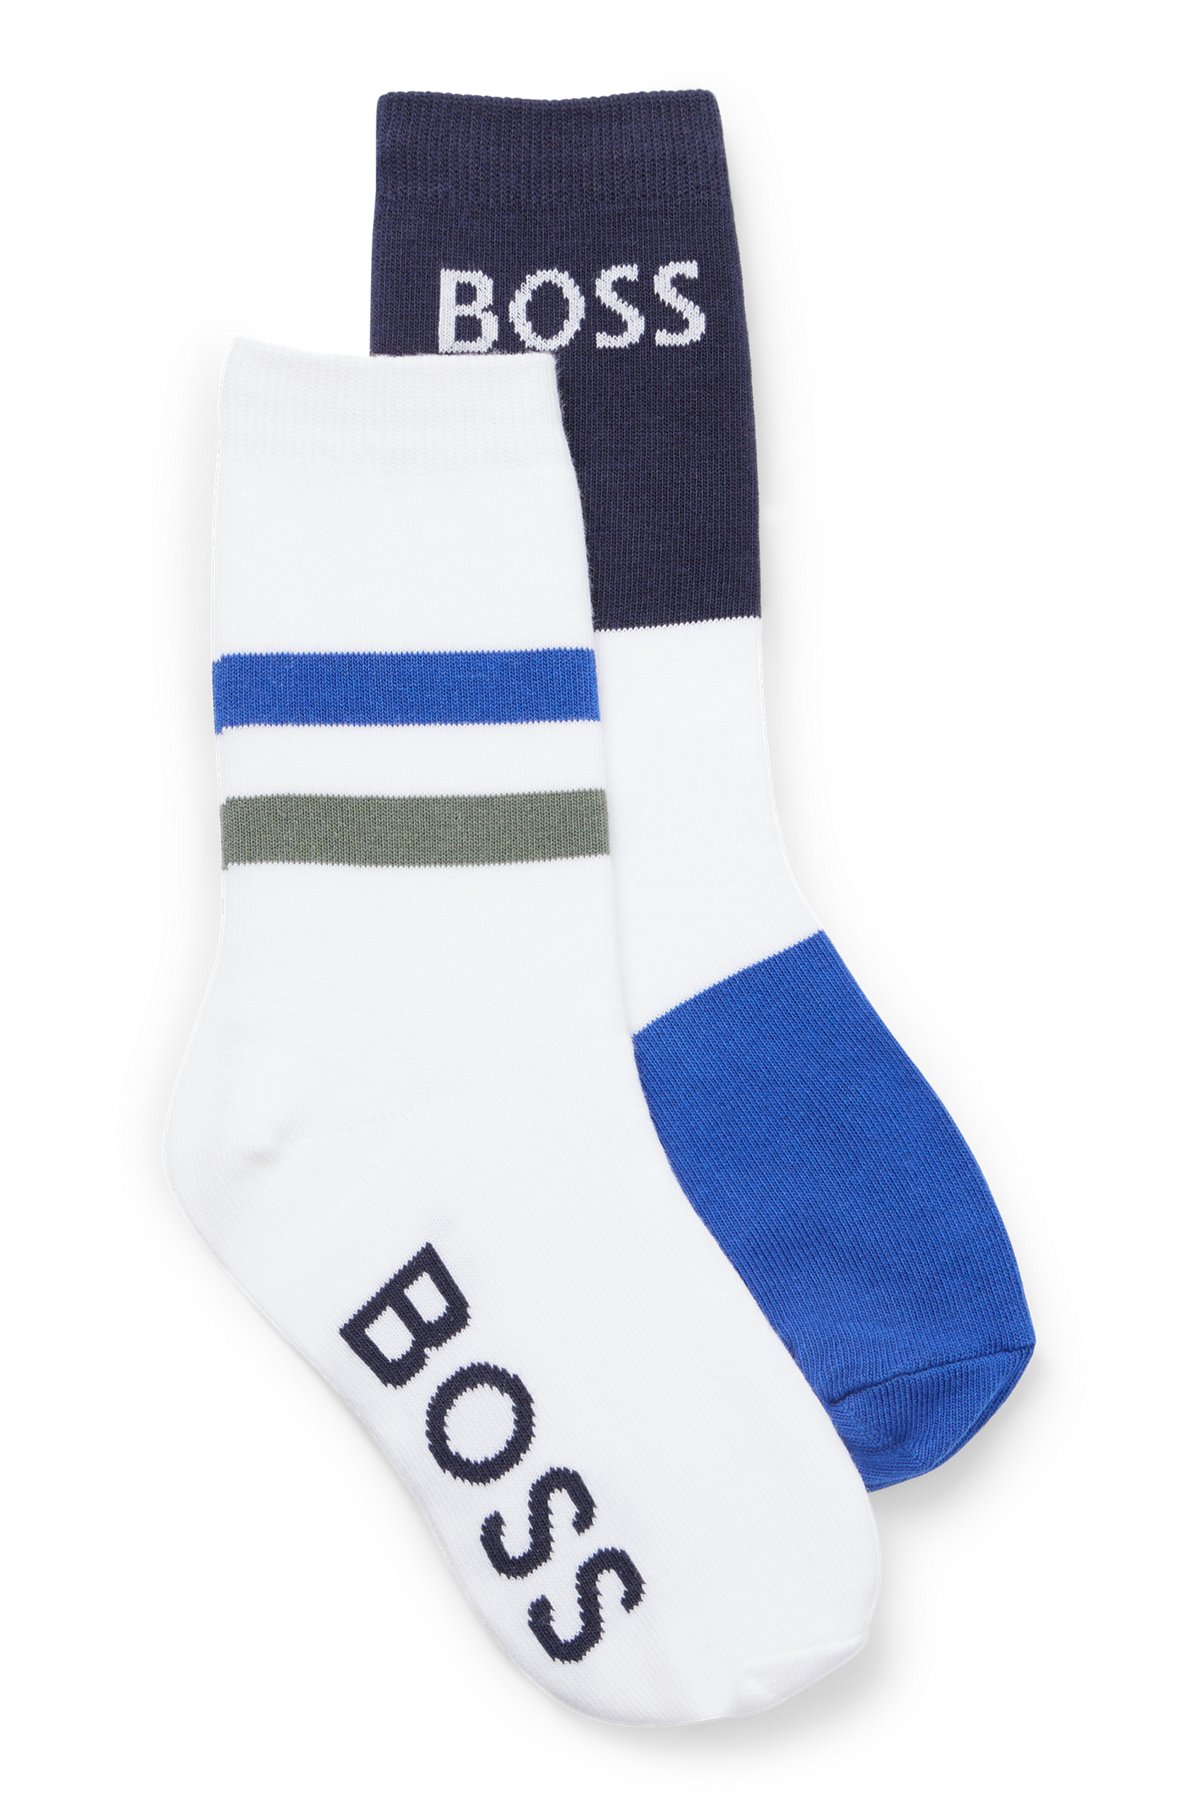 BOSS - Kids\' two-pack of socks with logo details